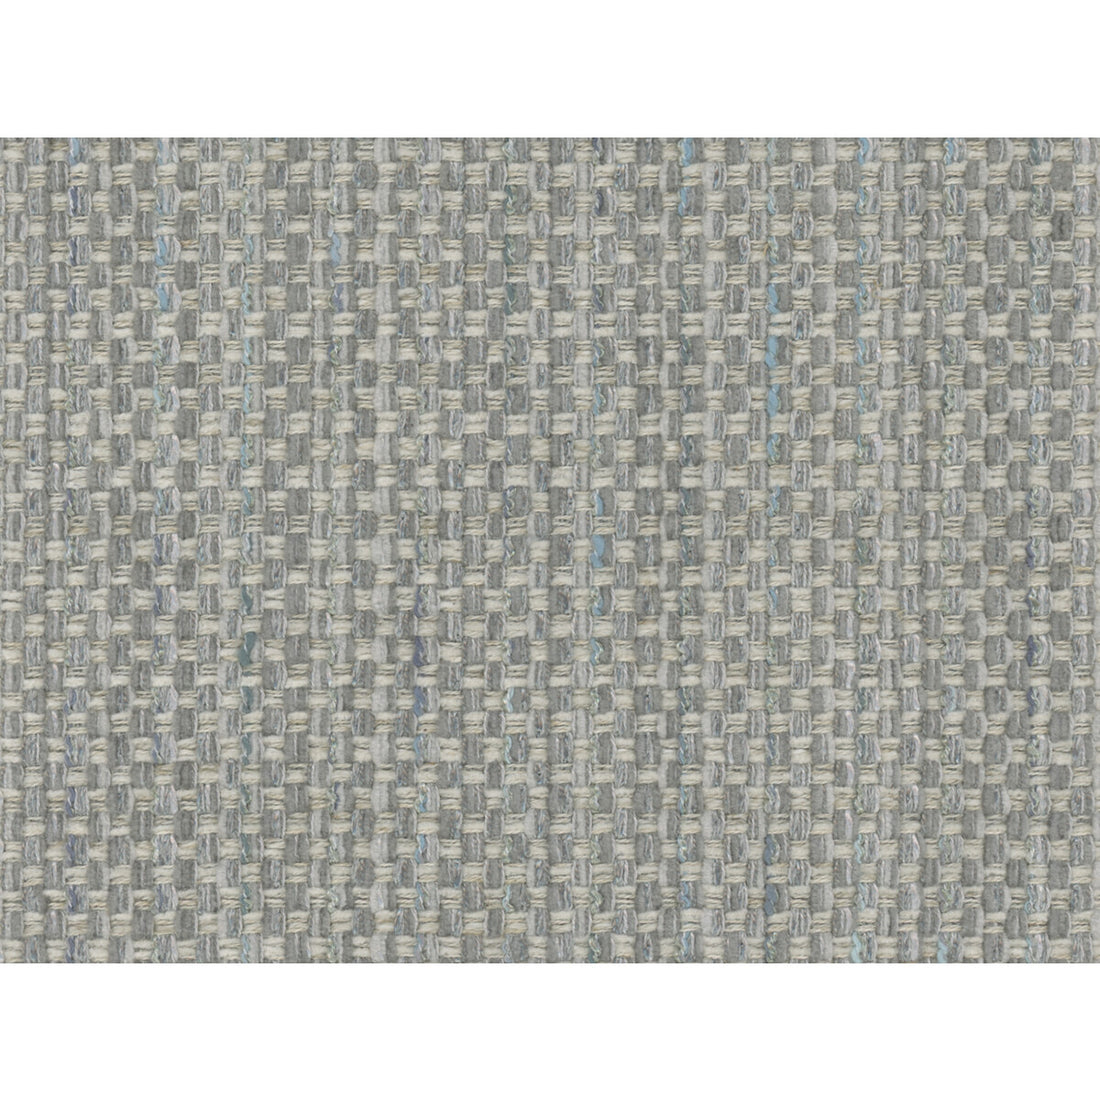 Tried And True fabric in chambray color - pattern 34464.1611.0 - by Kravet Couture